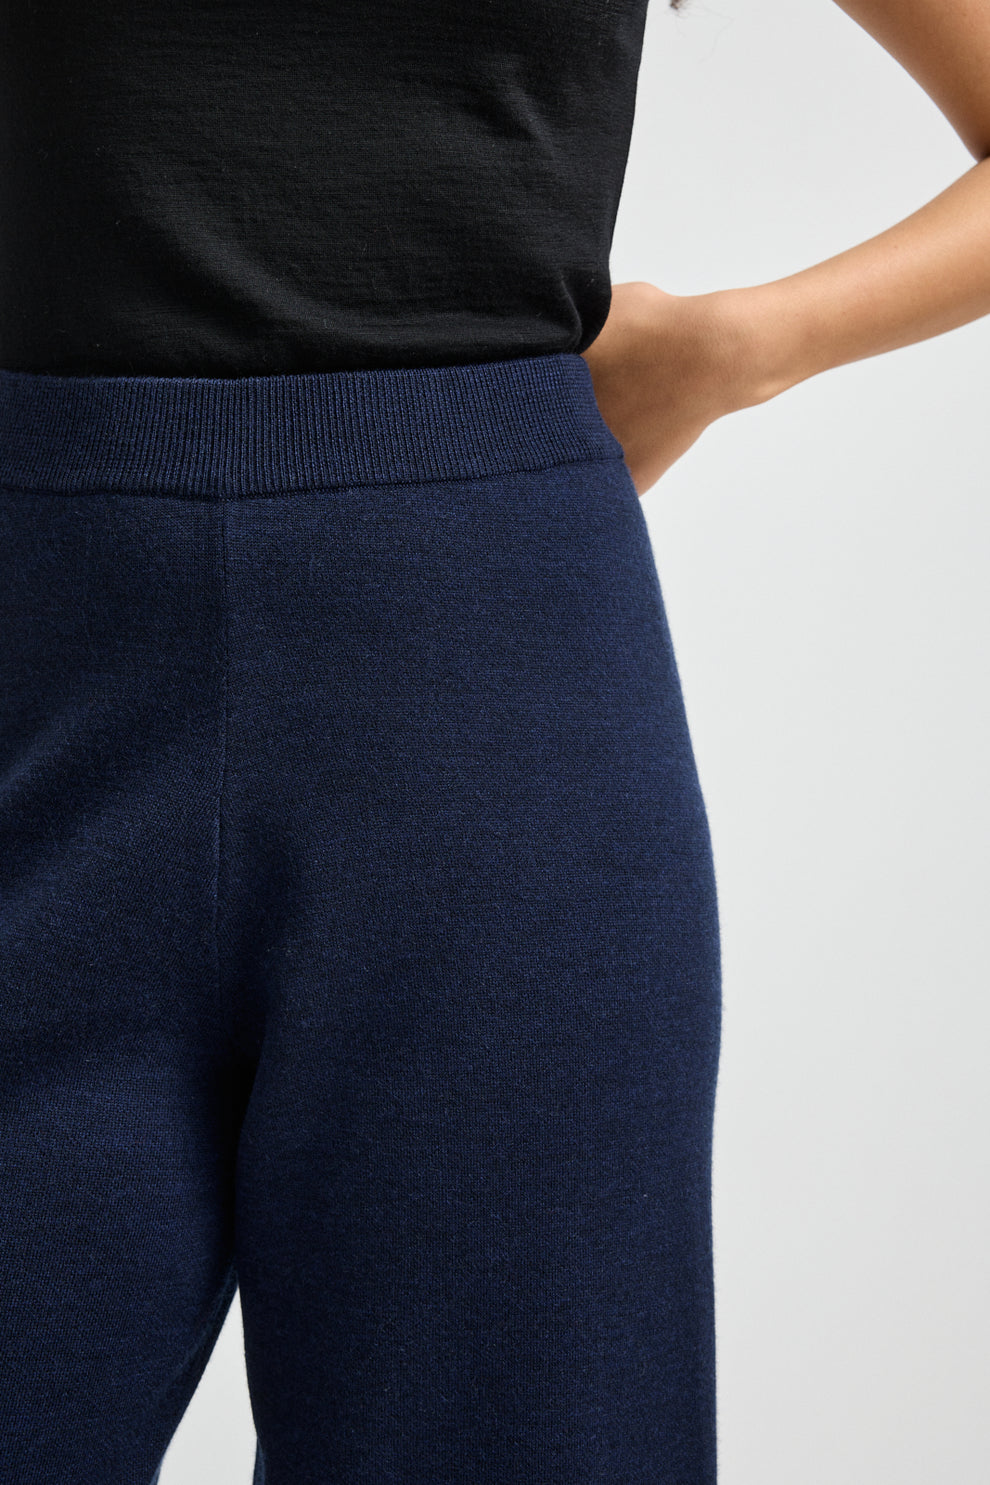 Ultra-Soft Knit Pants - Comfort and Style | Toorallie – Toorallie Australia